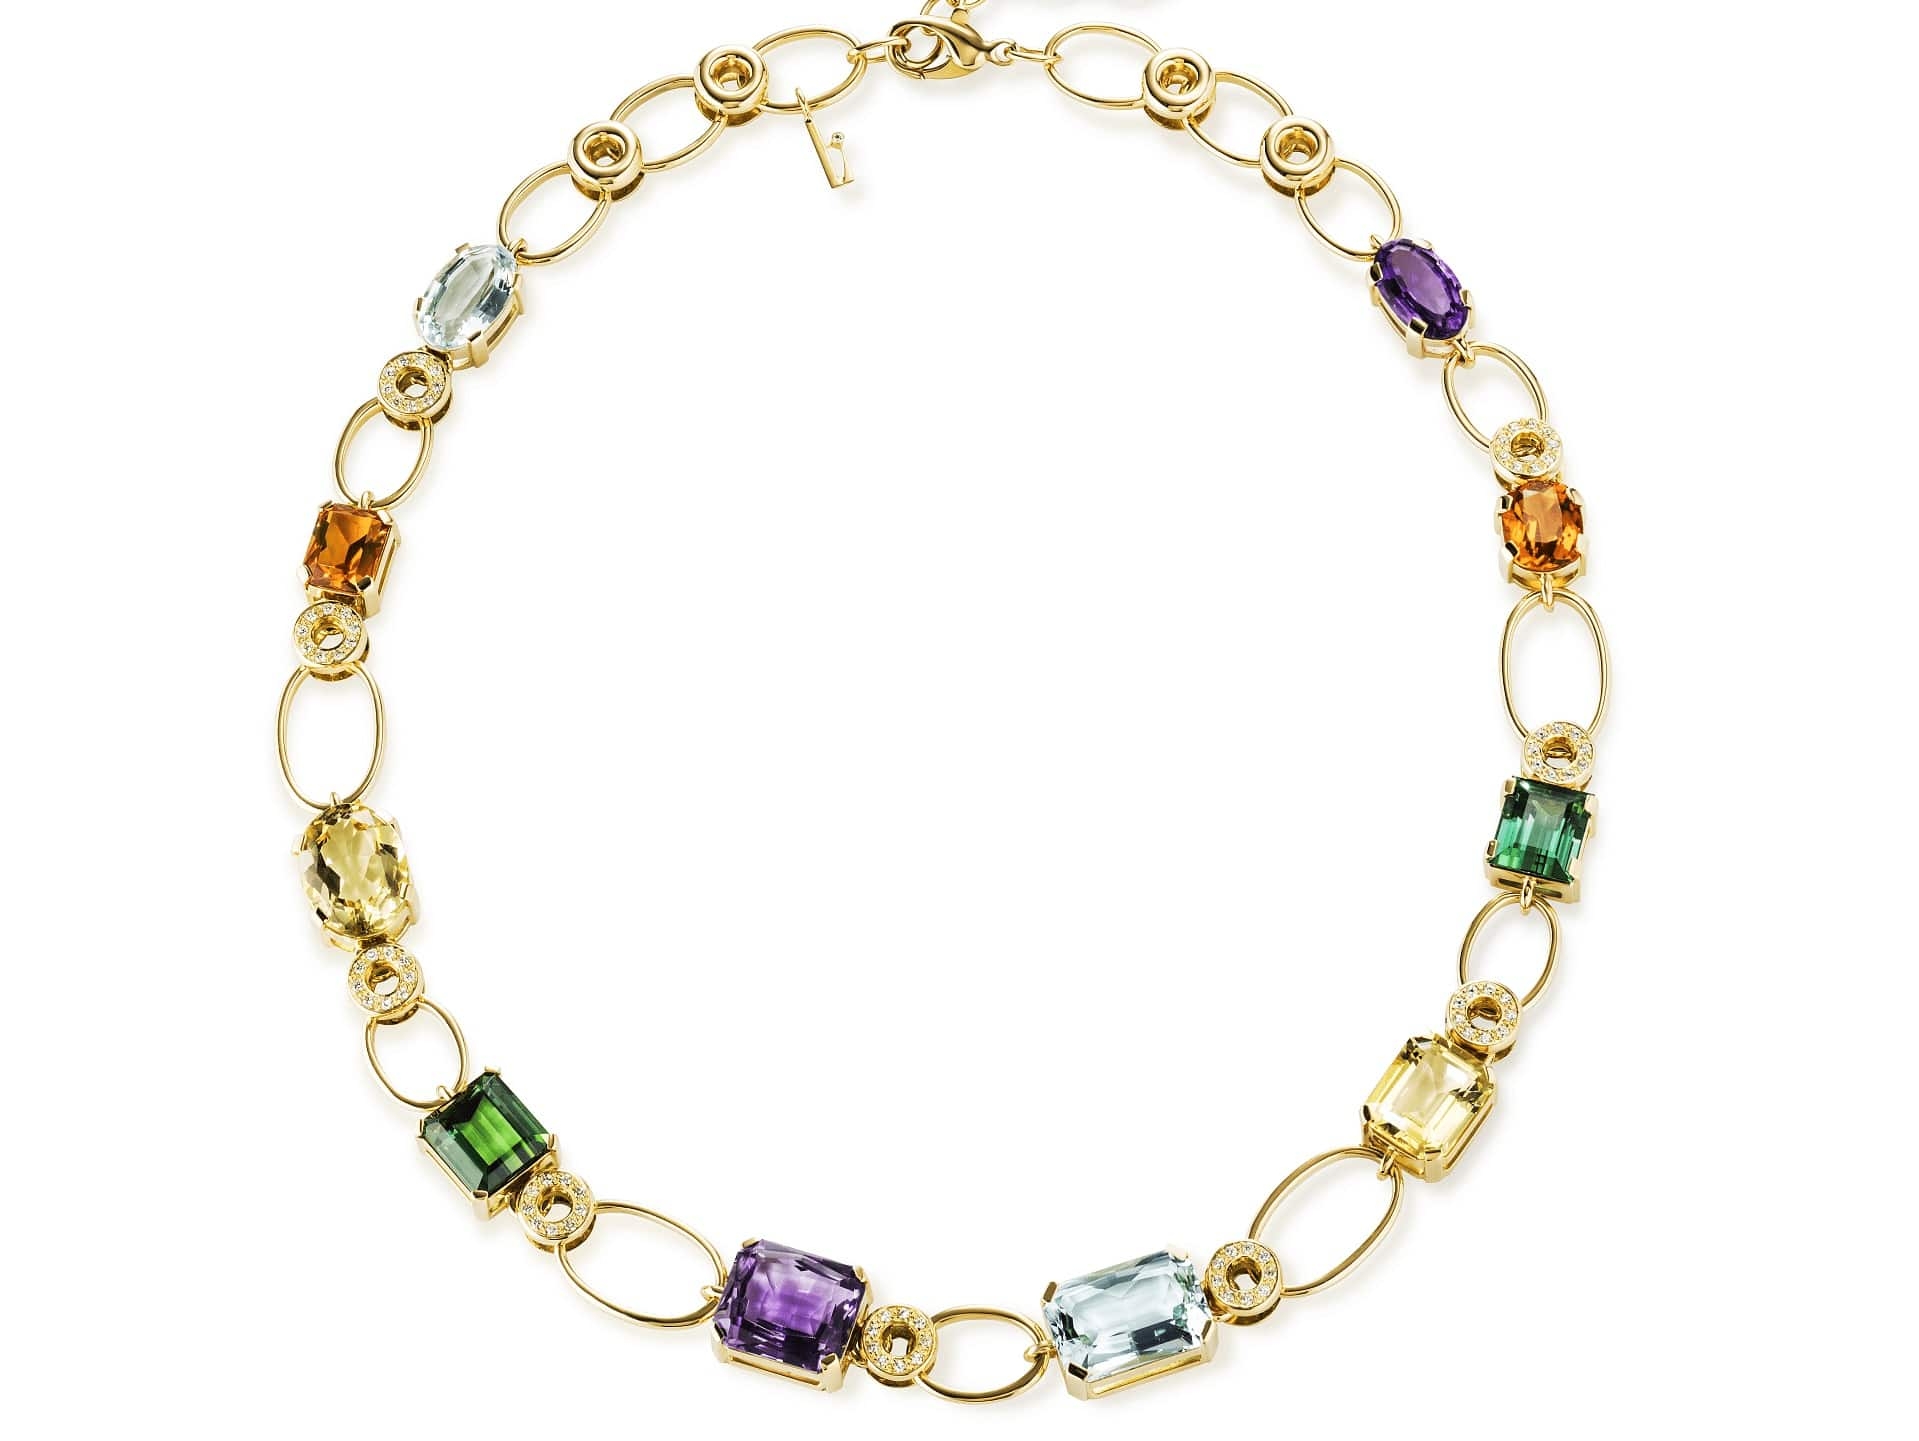 Collier1920-1440